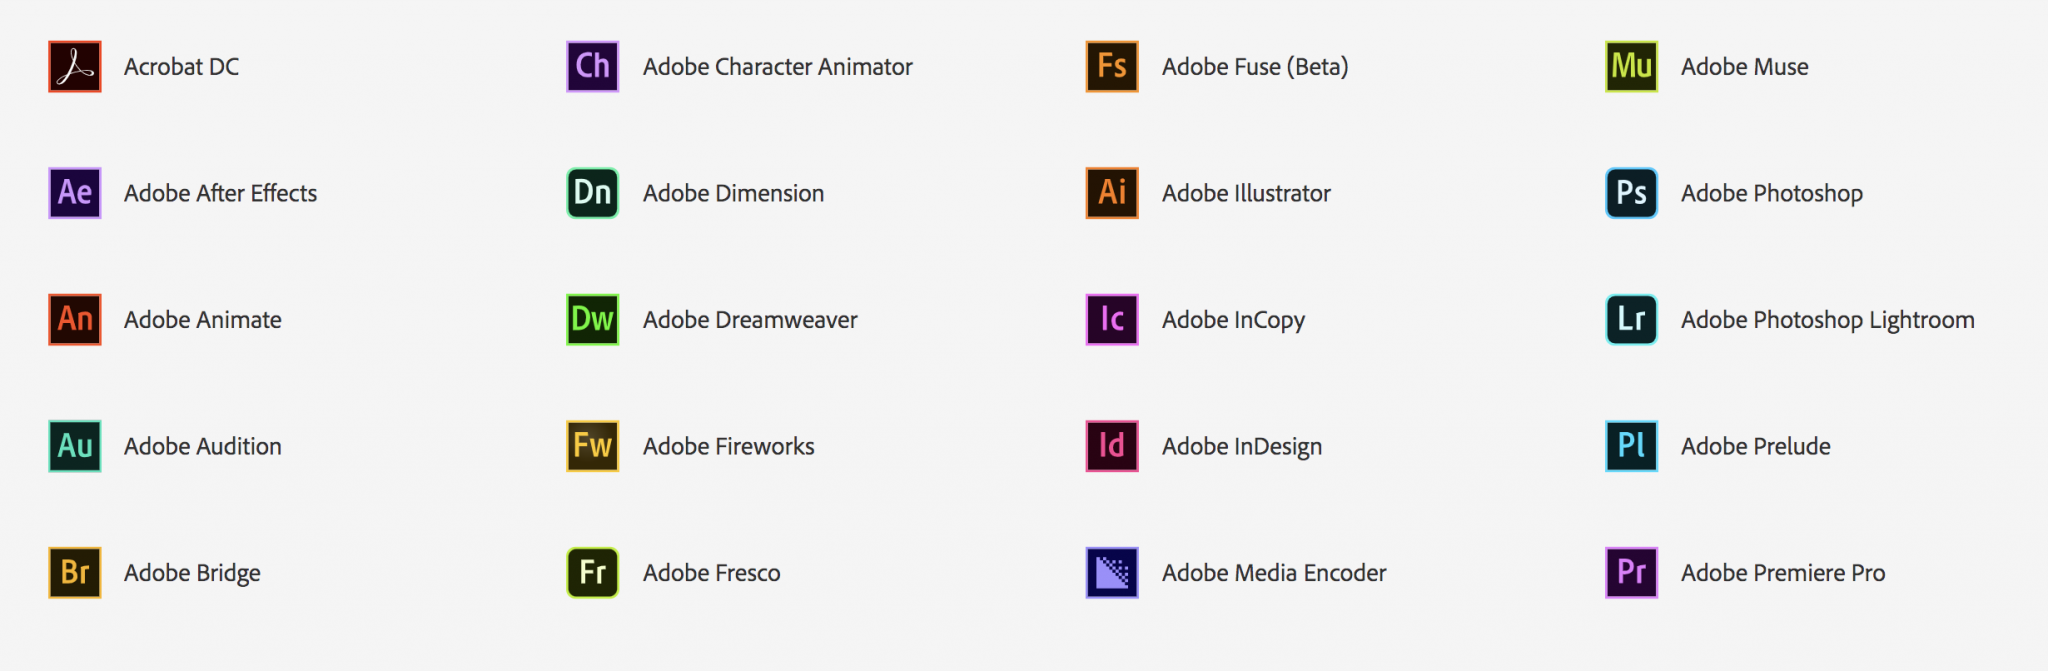 adobe creative cloud system requirements